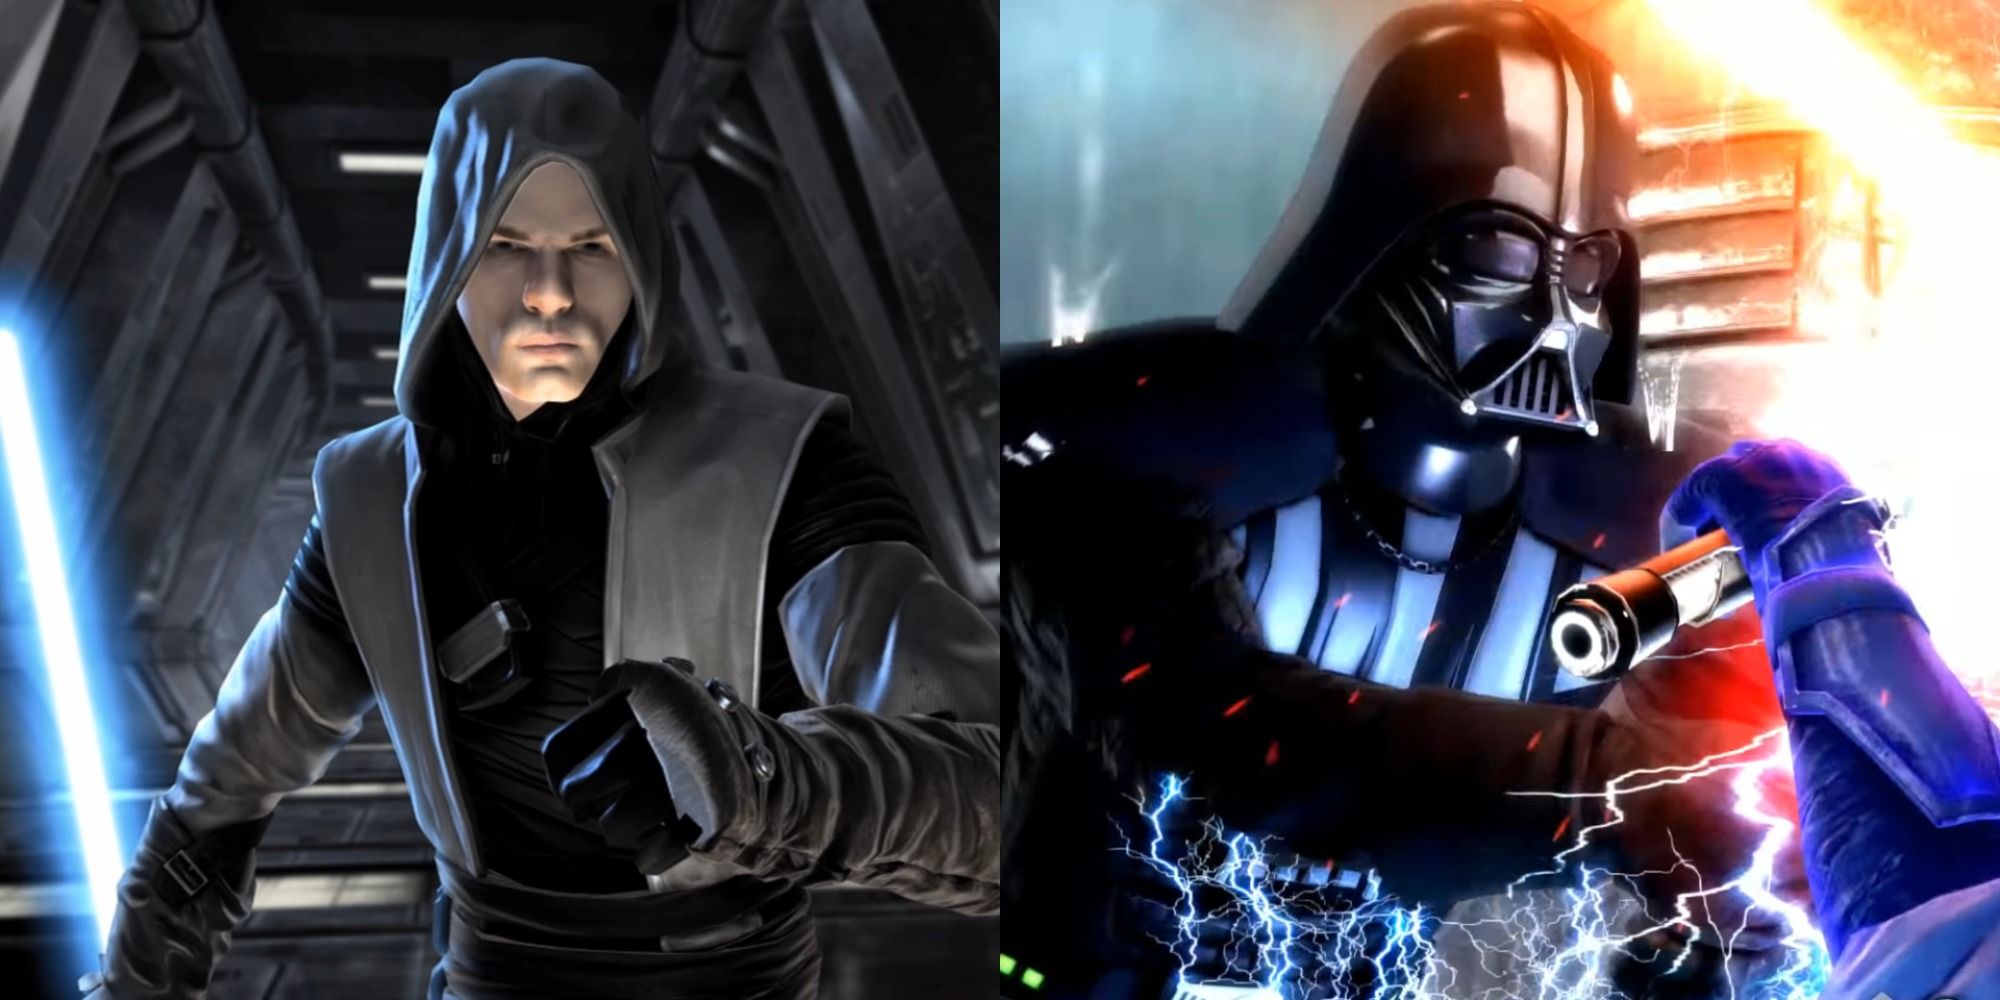 Split image of Galen Marek in The Force Unleashed and Starkiller fighting Darth Vader in The Force Unleashed II